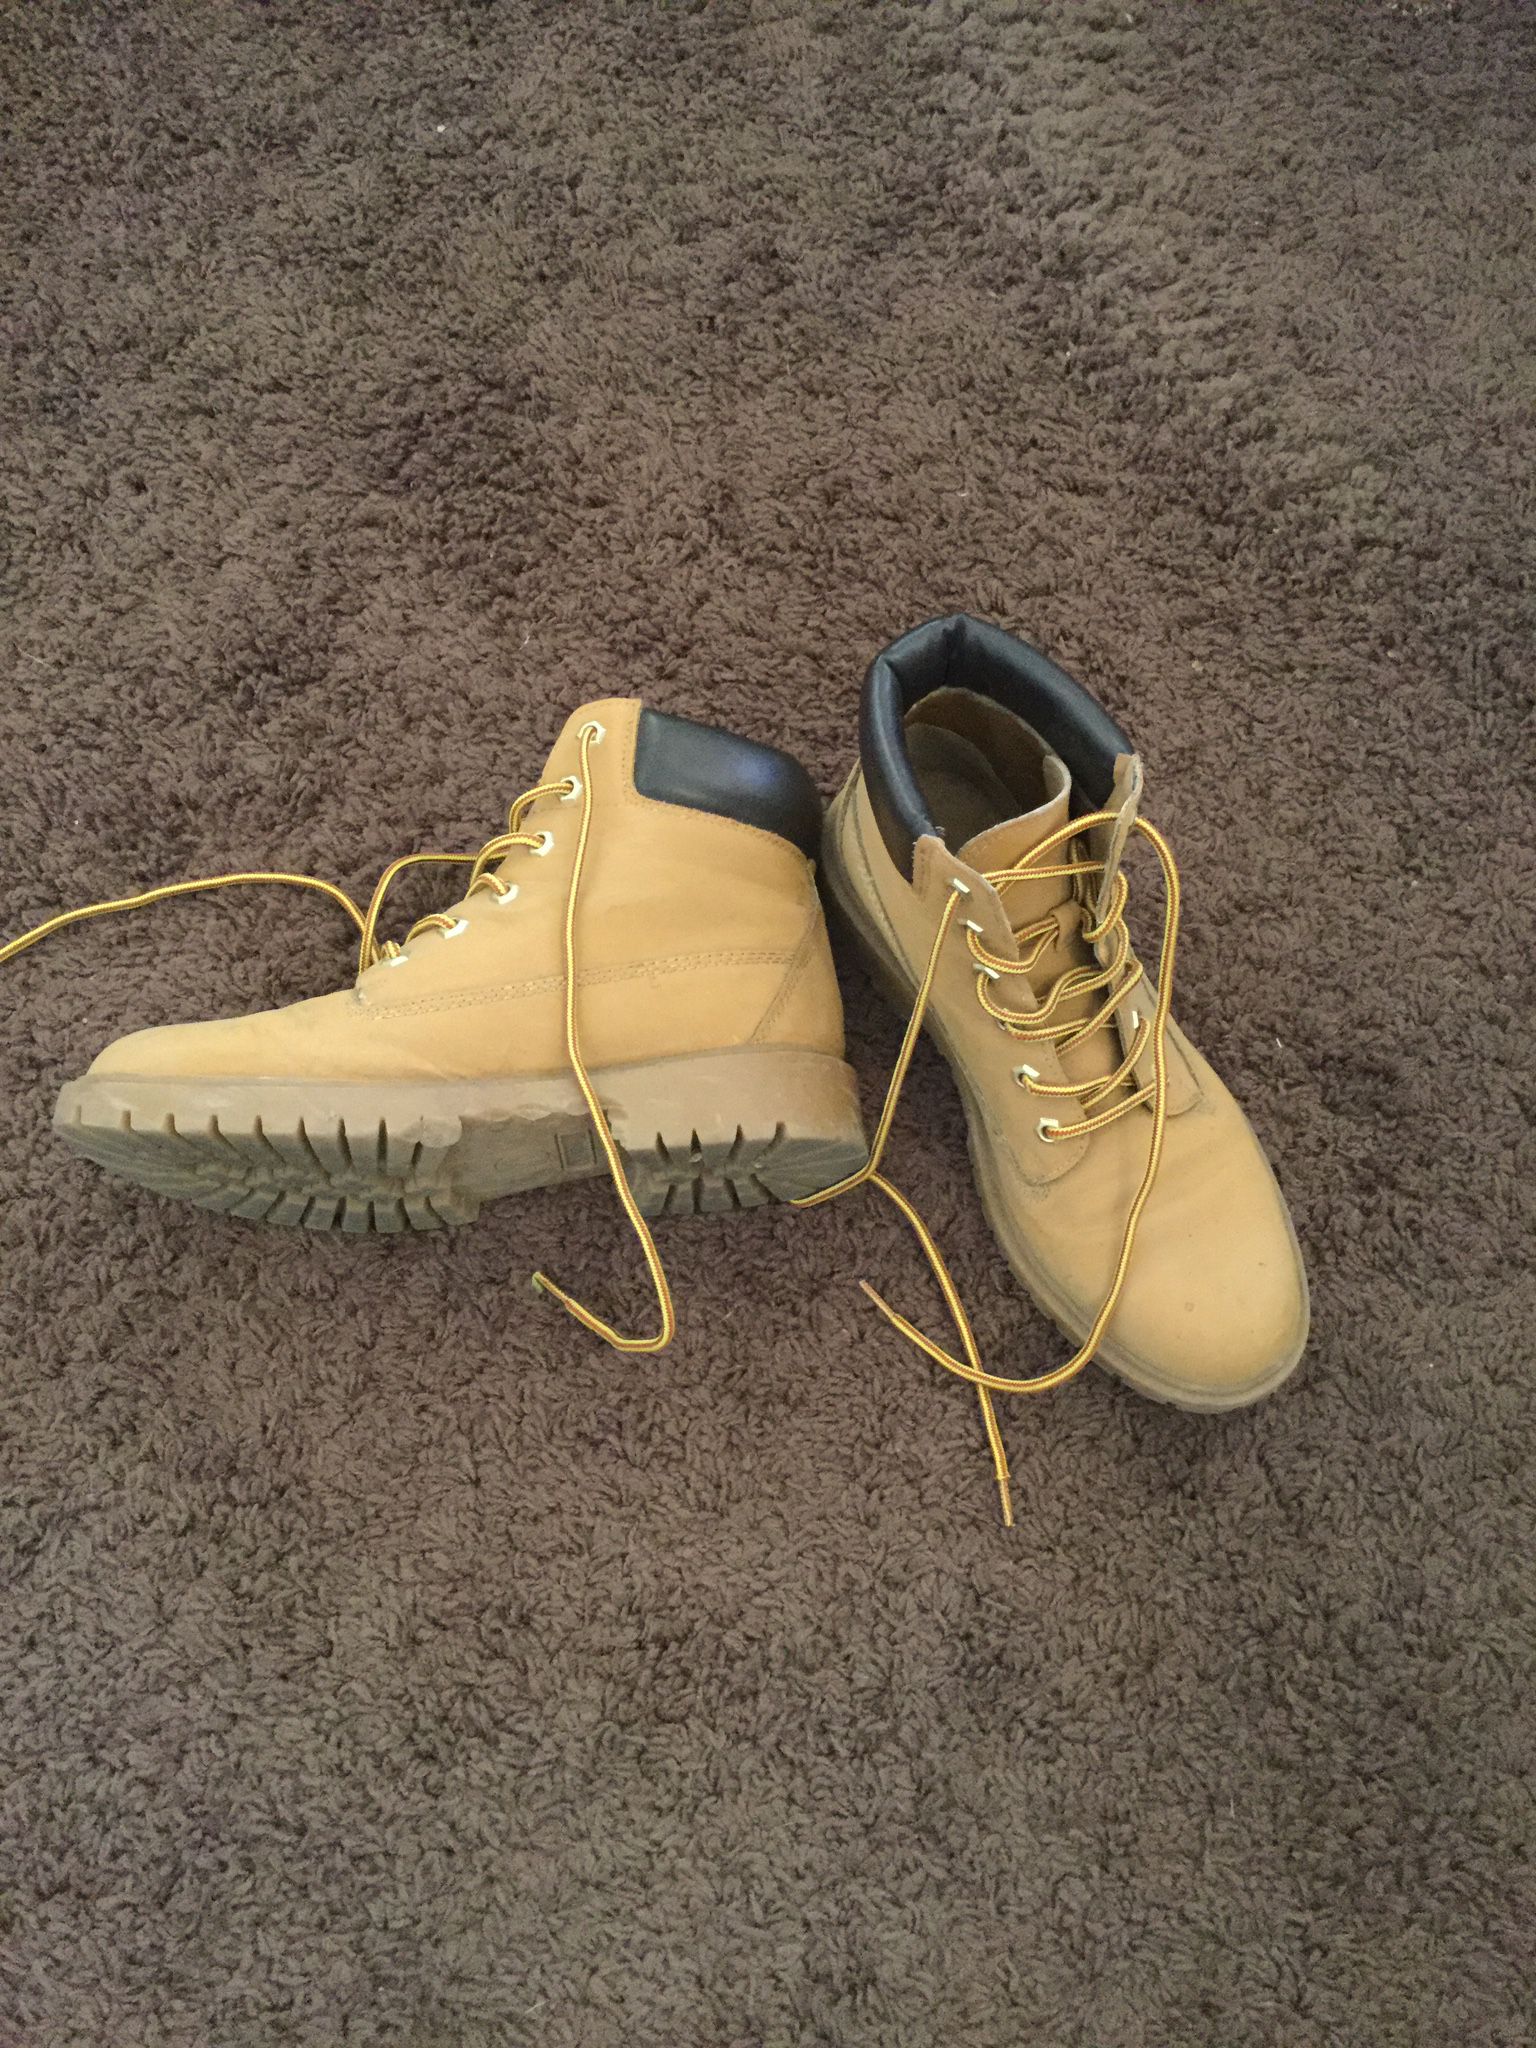 Women’s Boots - Size 8